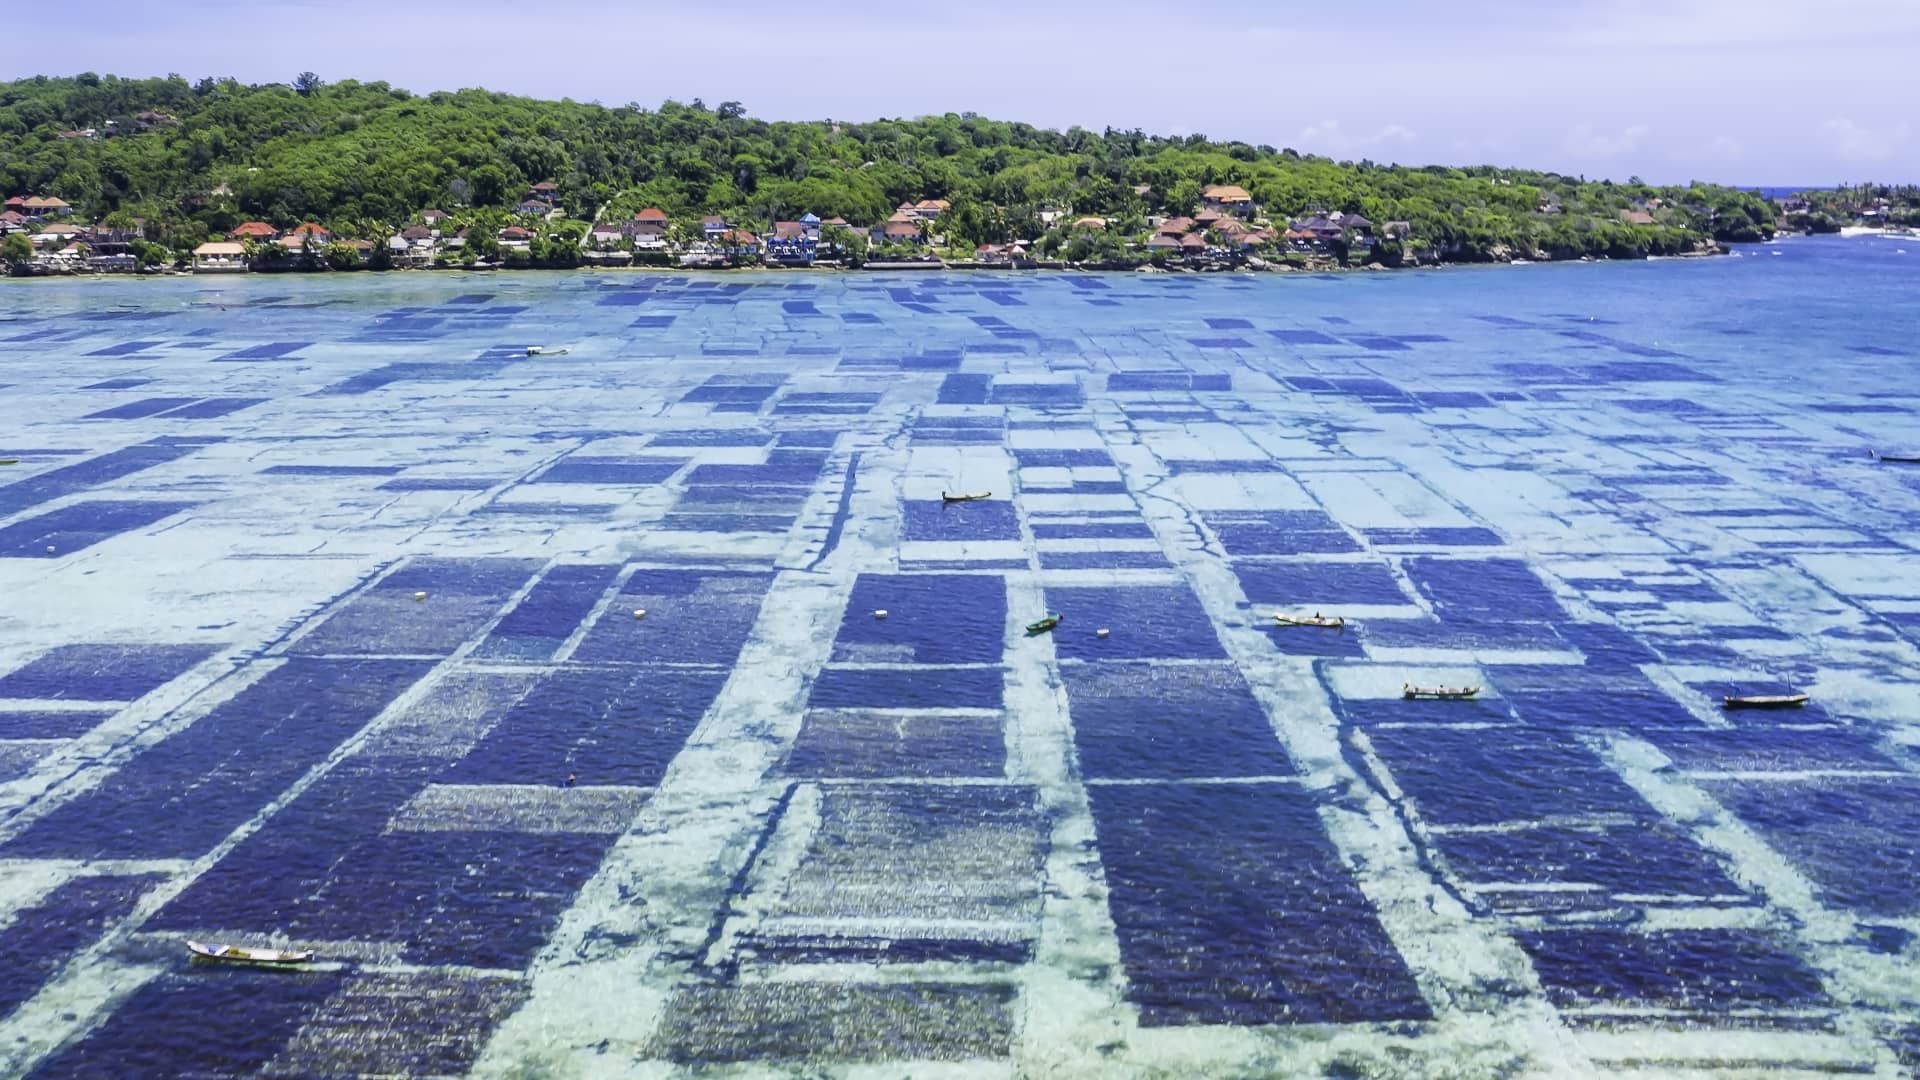 An aerial view of a site used for seaweed farming in waters off Bali, Indonesia.